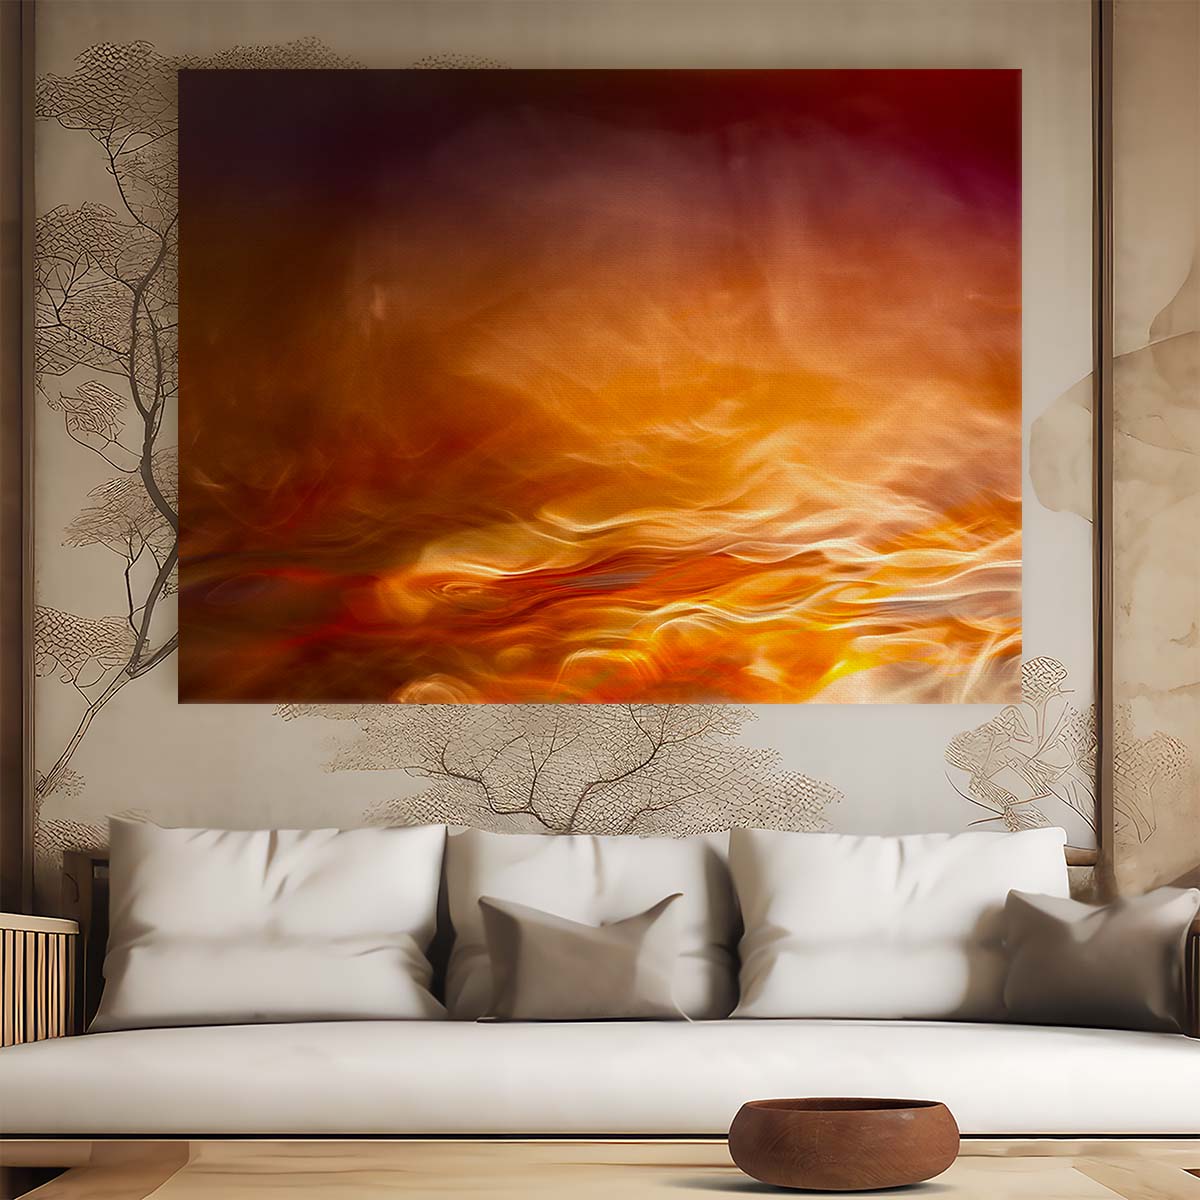 Romantic Fire & Water Flames Abstract Wall Art by Luxuriance Designs. Made in USA.